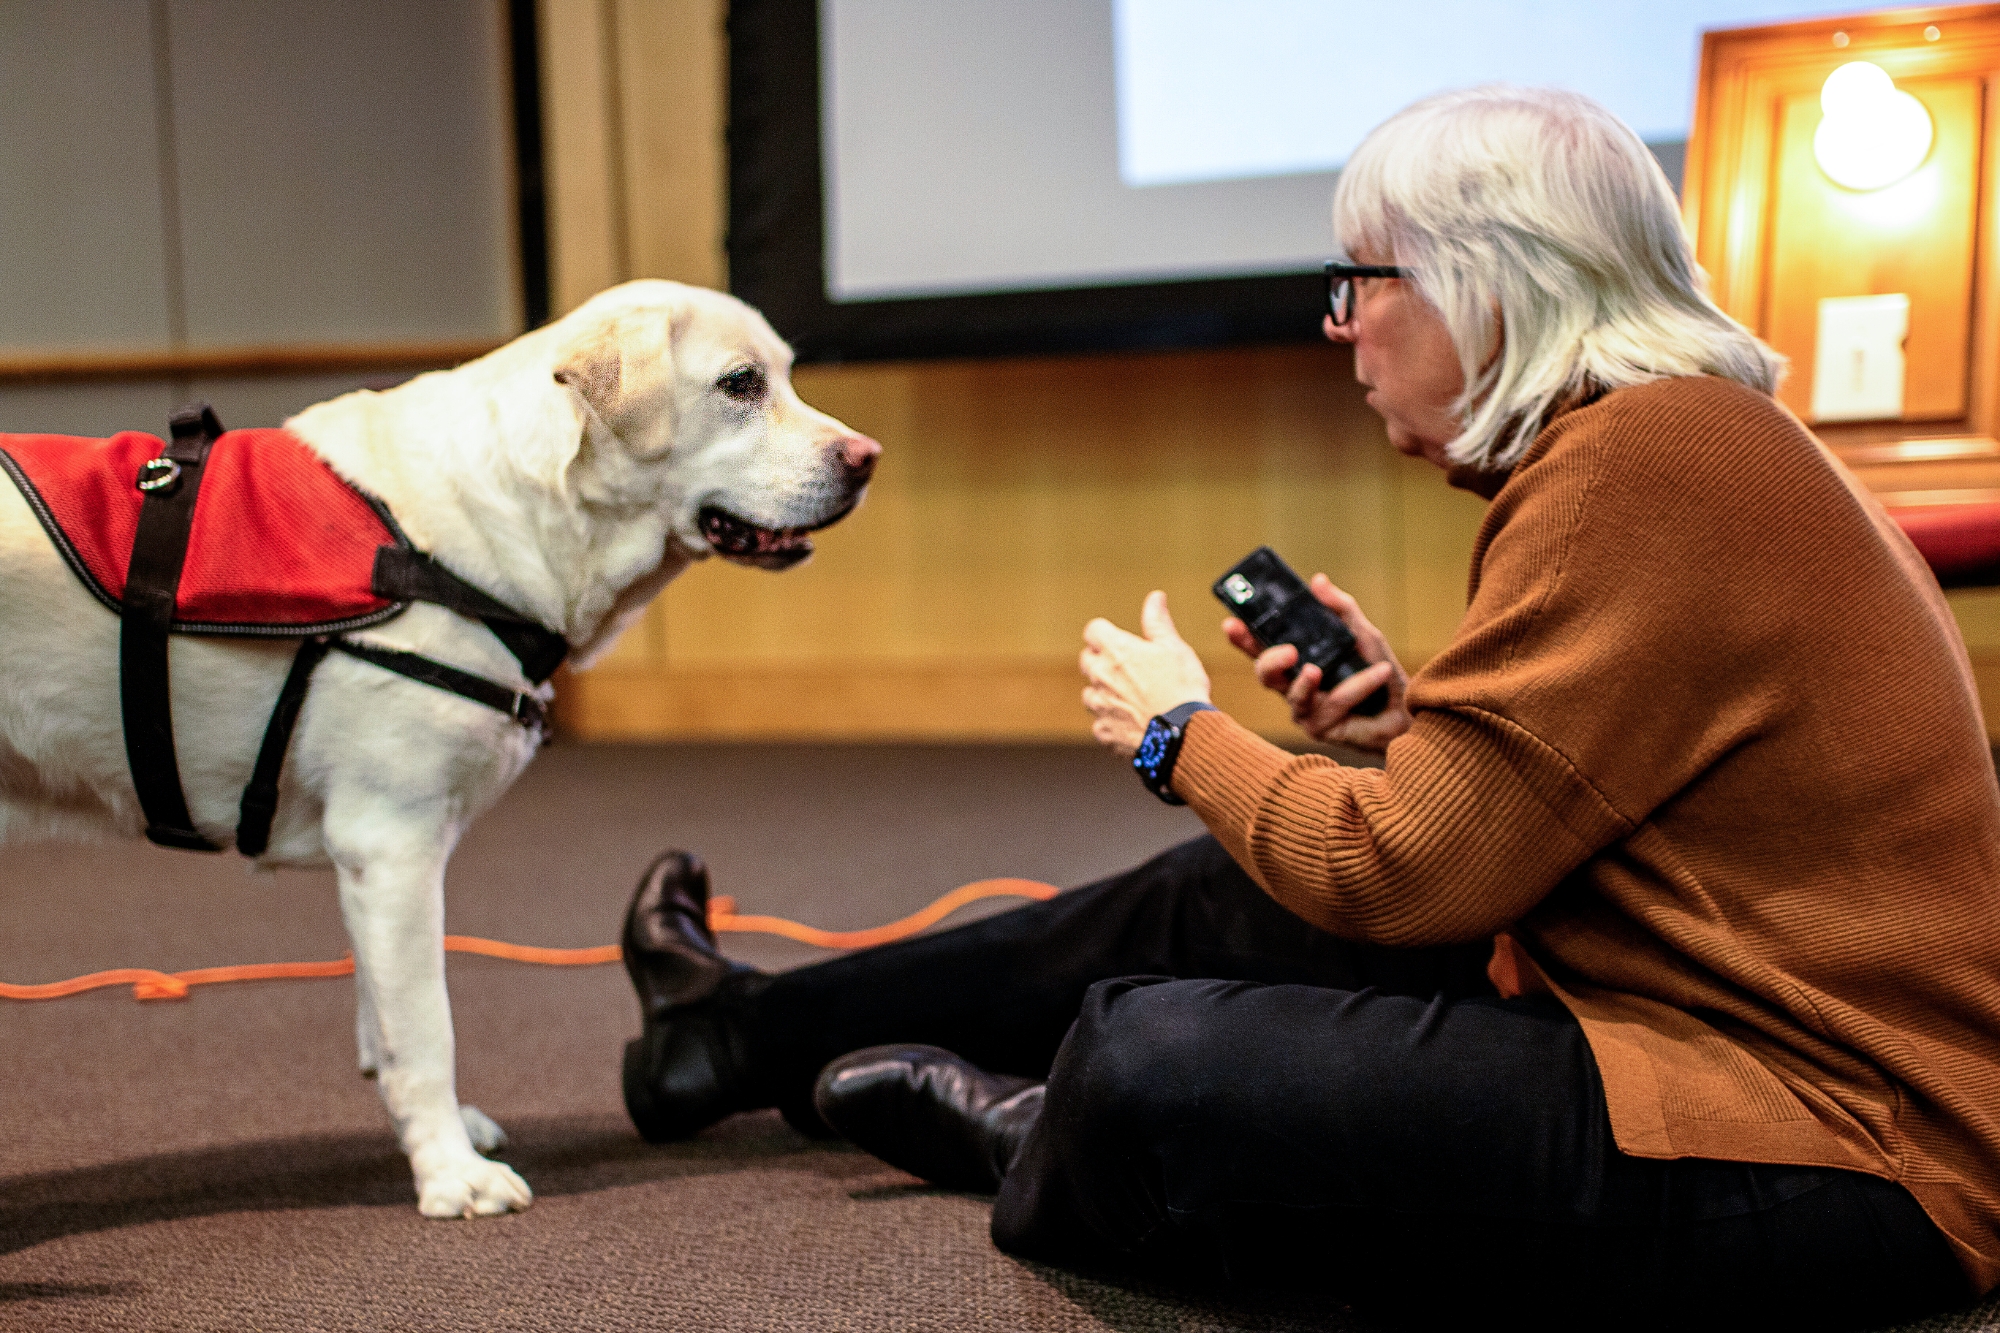 Professor Paws and Mary Isaacson sharing and demonstrating his abilities during presentation